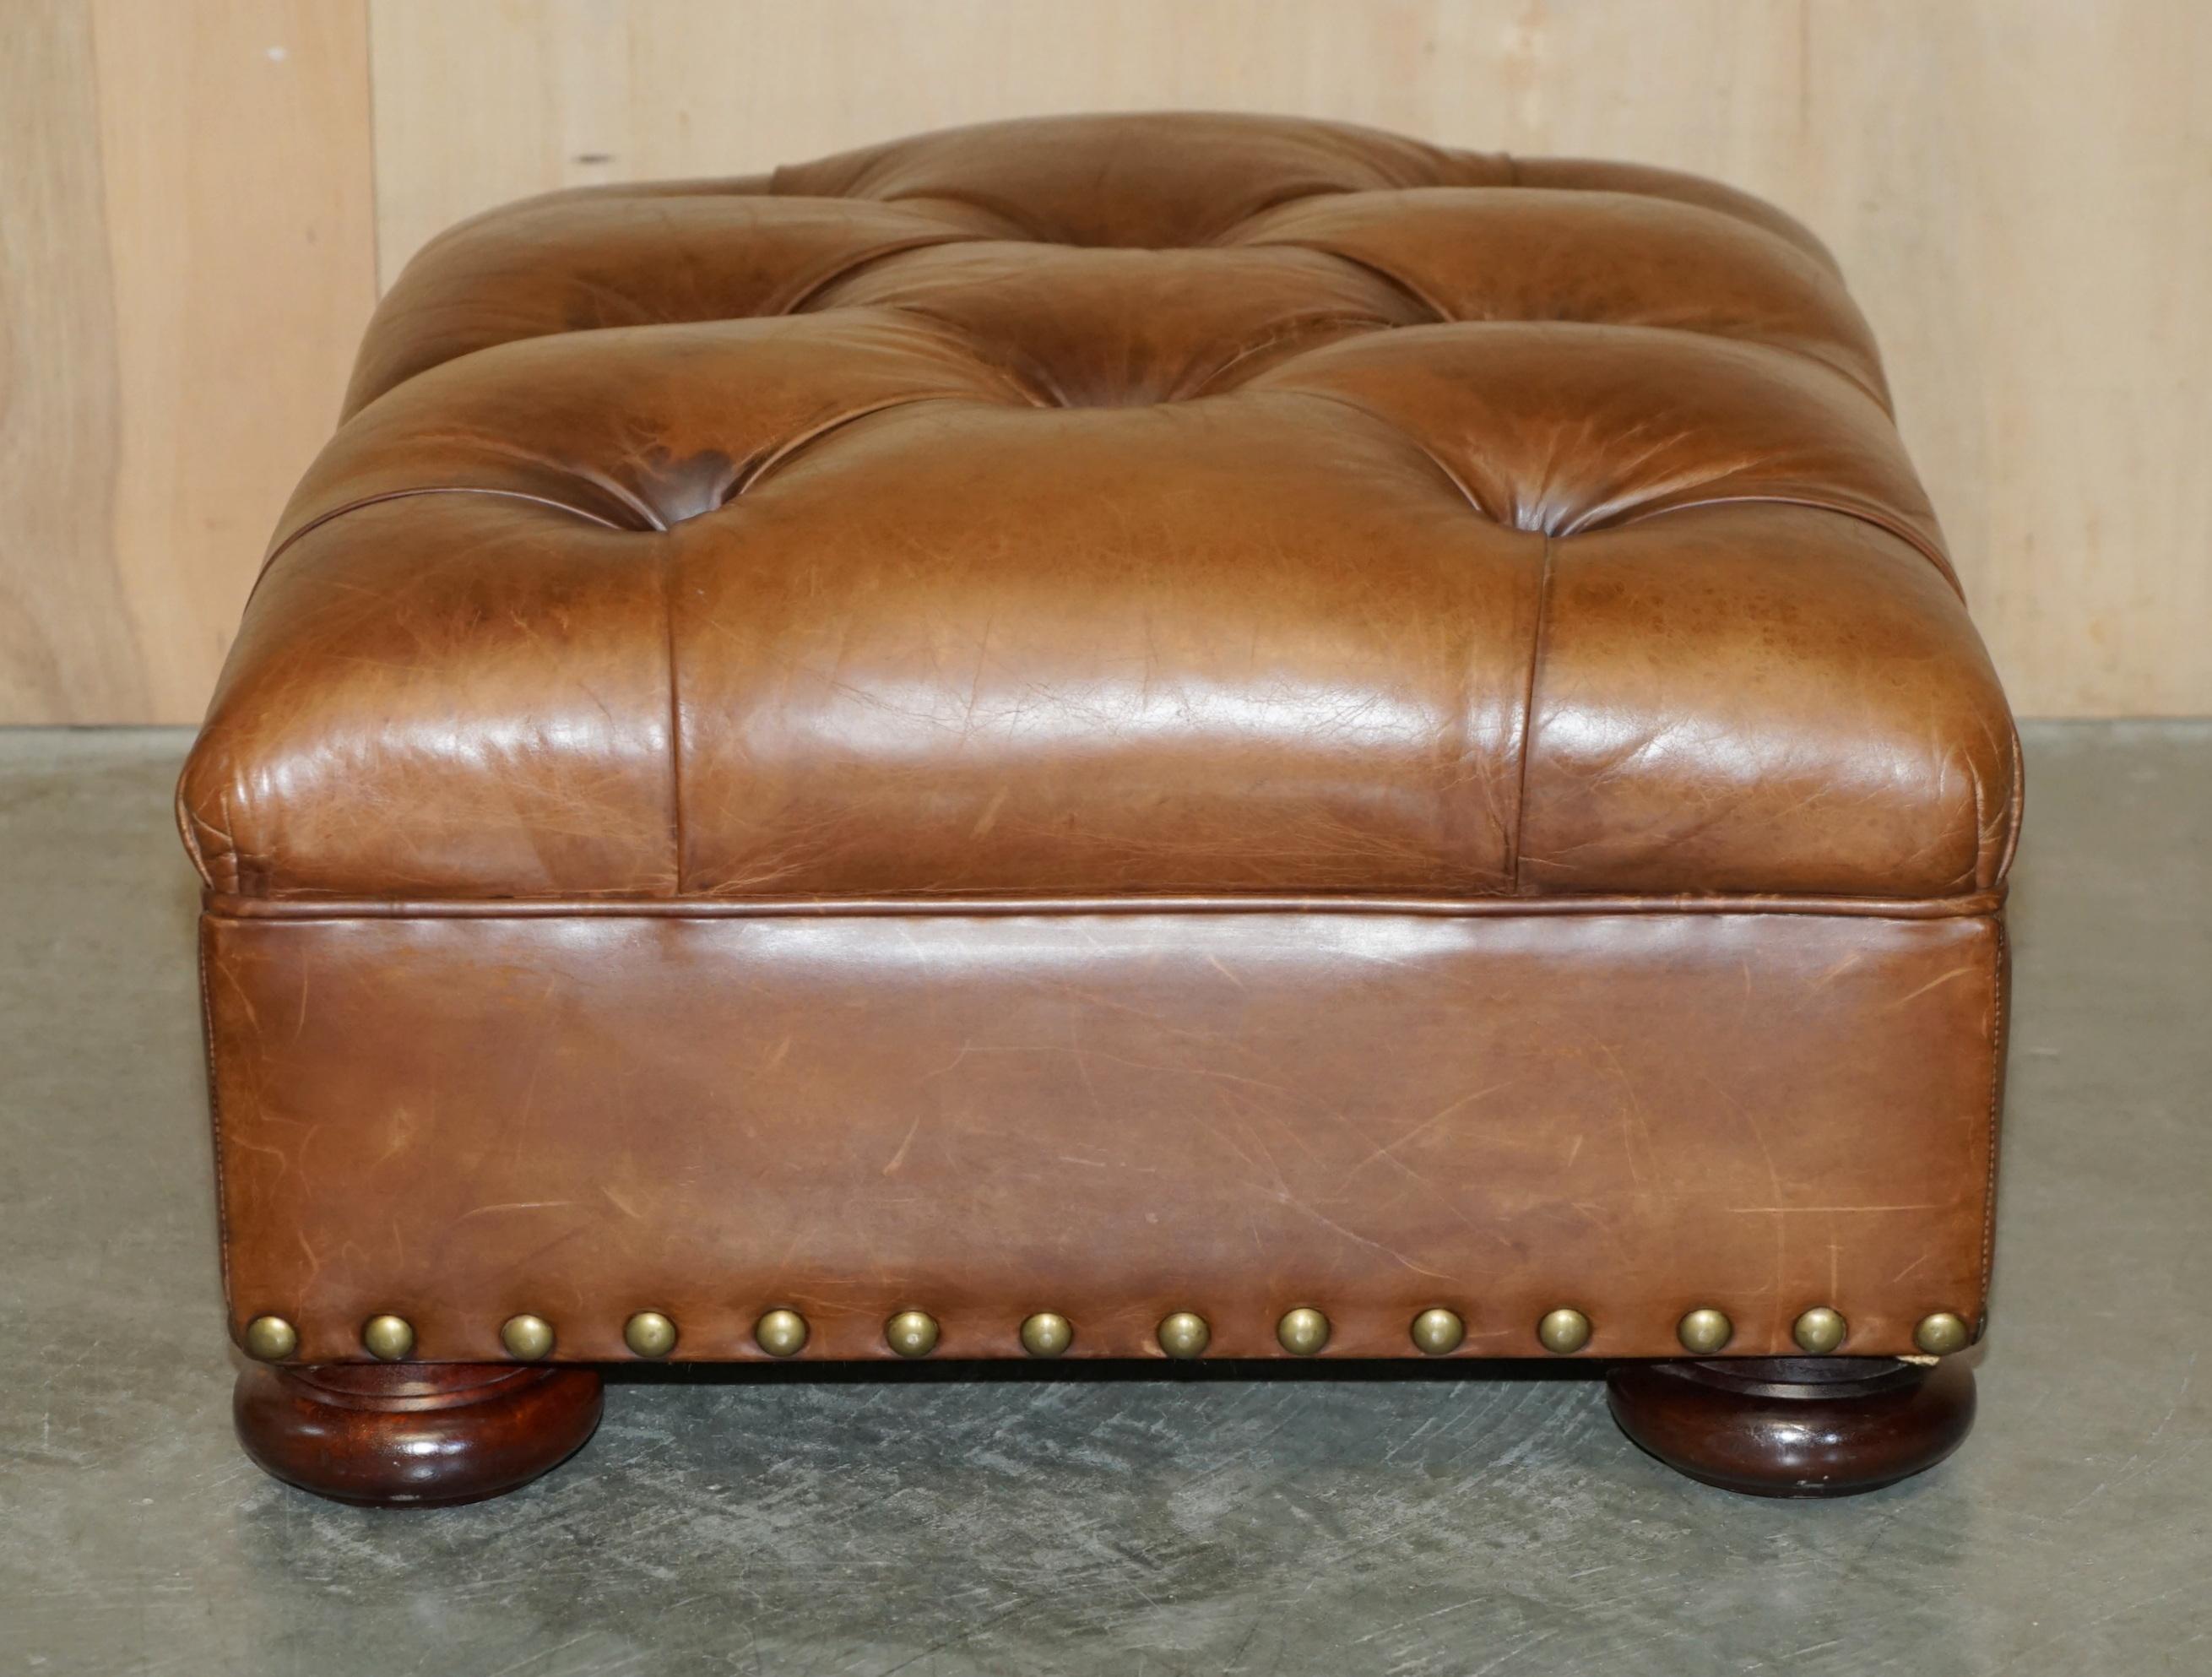 RALPH LAUREN WRITER'S CHESTERFIELD FOOTSTOOL OTTOMAN IN HERiTAGE BROWN LEATHER 8